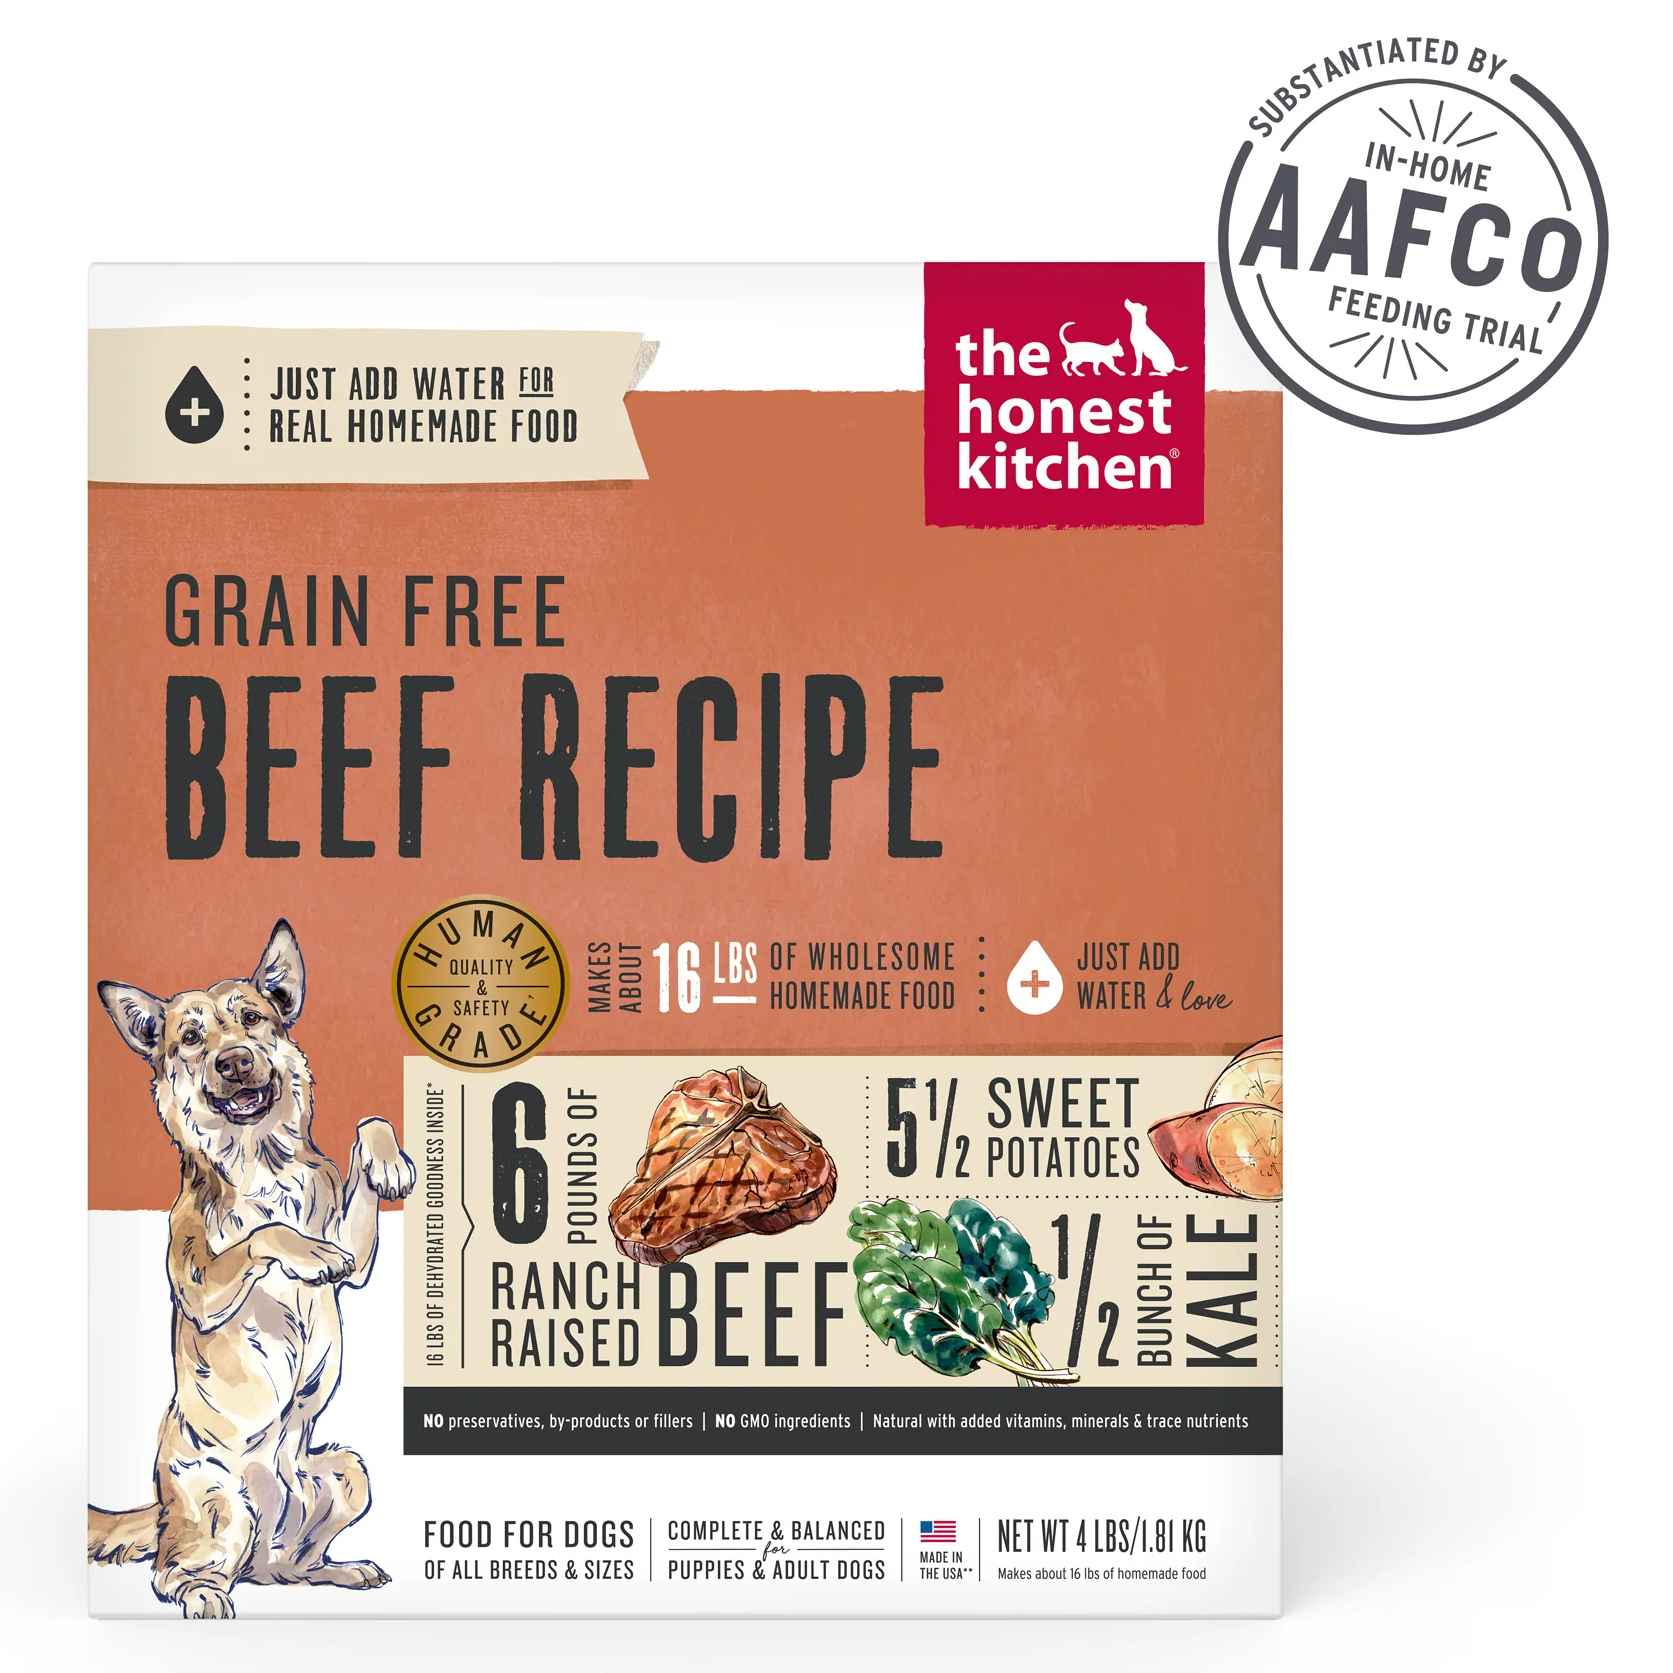 The Honest Kitchen Beef Recipe Dehydrated Dog Food